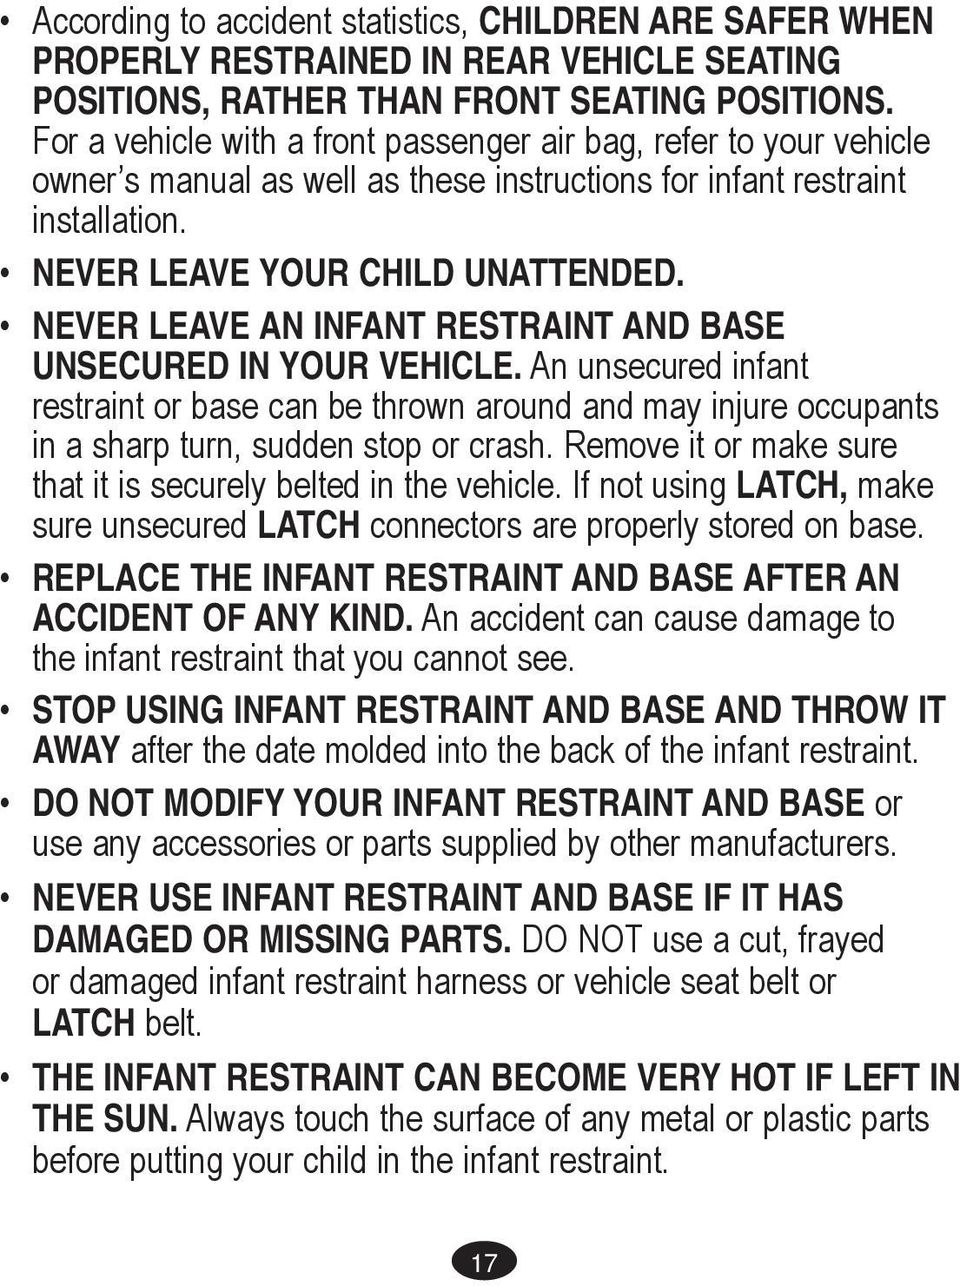 NEVER LEAVE AN INFANT RESTRAINT AND BASE UNSECURED IN YOUR VEHICLE. An unsecured infant restraint or base can be thrown around and may injure occupants in a sharp turn, sudden stop or crash.